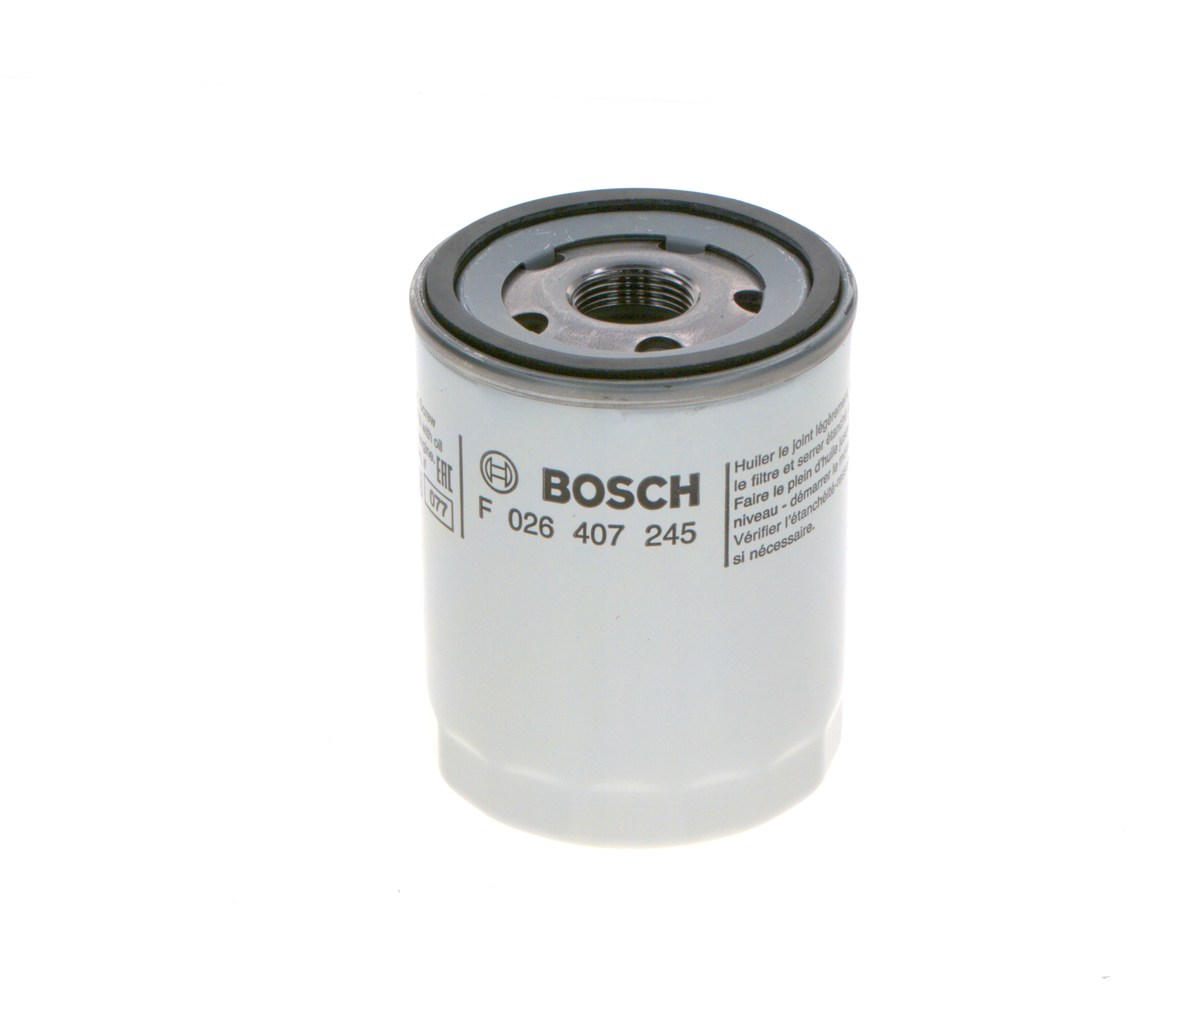 BOSCH F 026 407 245 Oil filter M 22 x 1,5, with two anti-return valves, Spin-on Filter